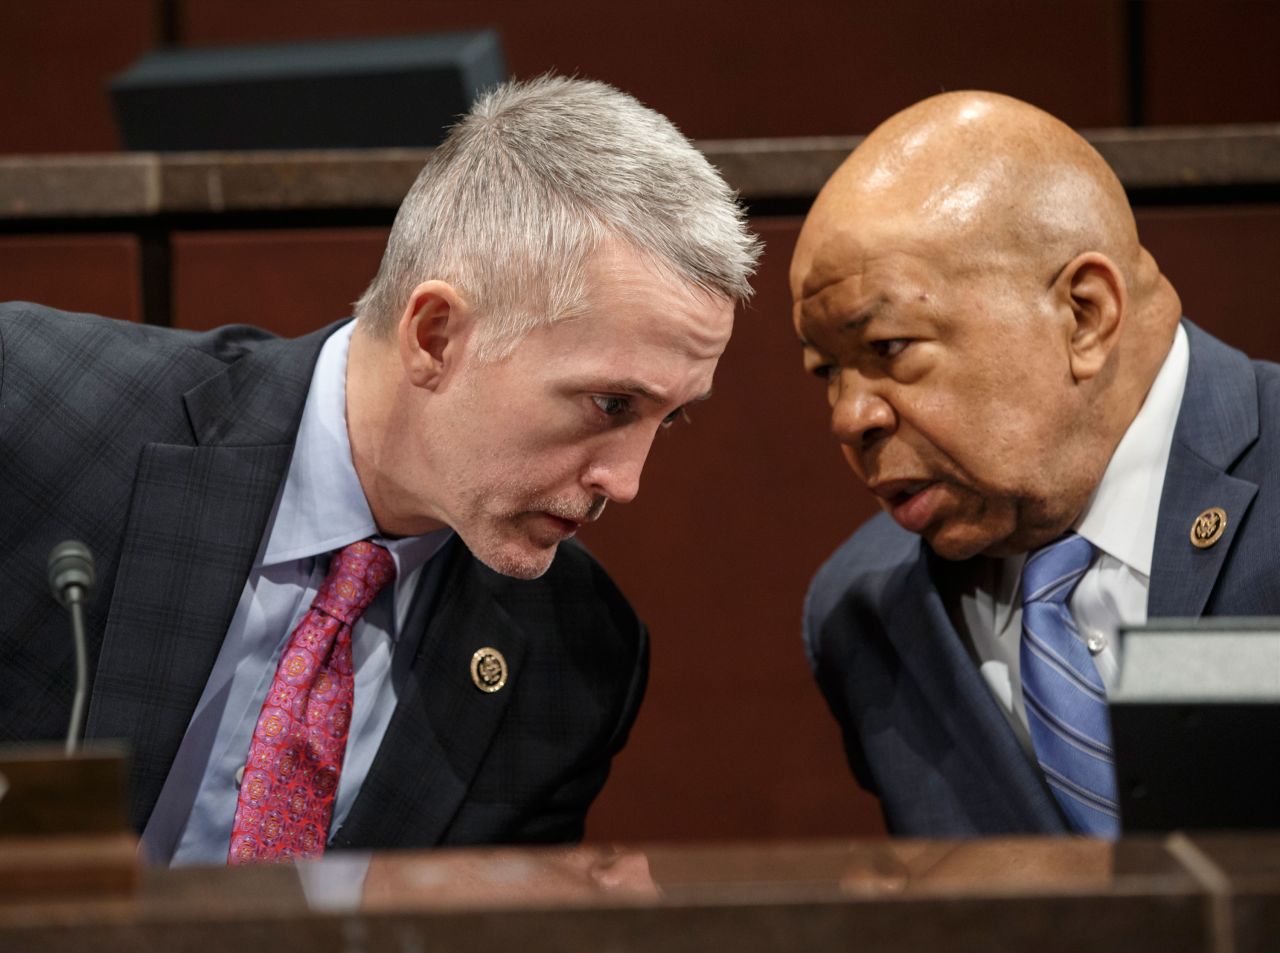 US Rep. Trey Gowdy confers with Cummings in January 2015, at the start of a public hearing to investigate the 2012 attacks on the US Consulate in Benghazi, Libya.